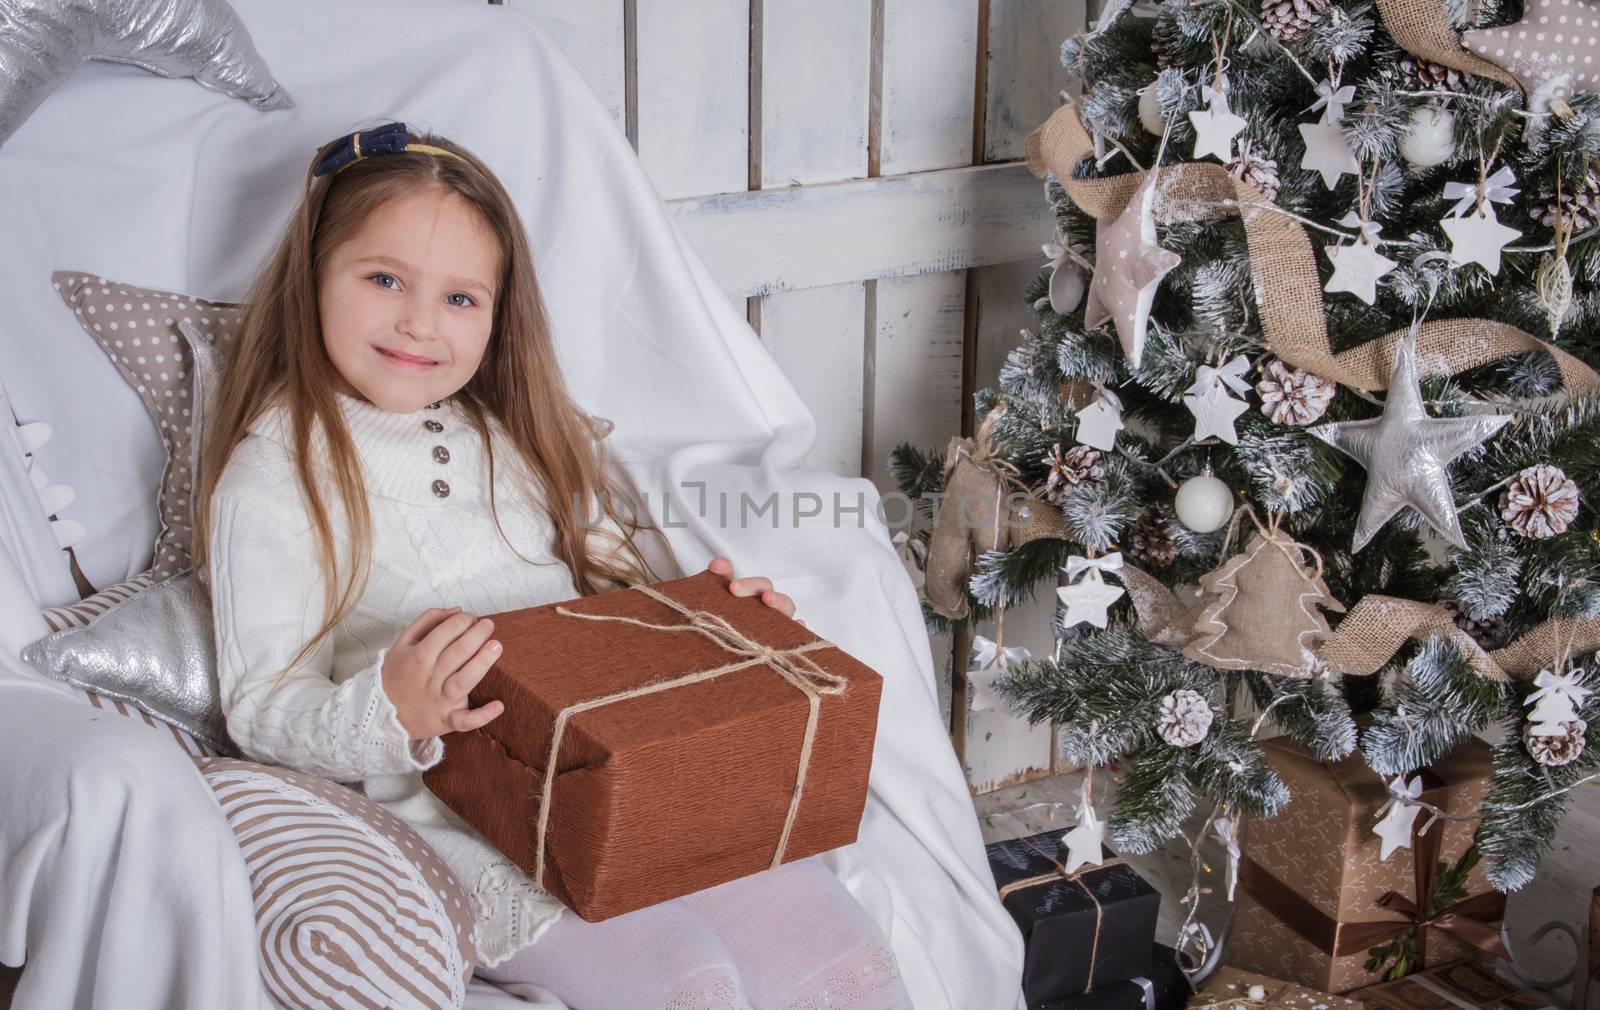 Smiling cute girl with Christmas gift sitting on chair